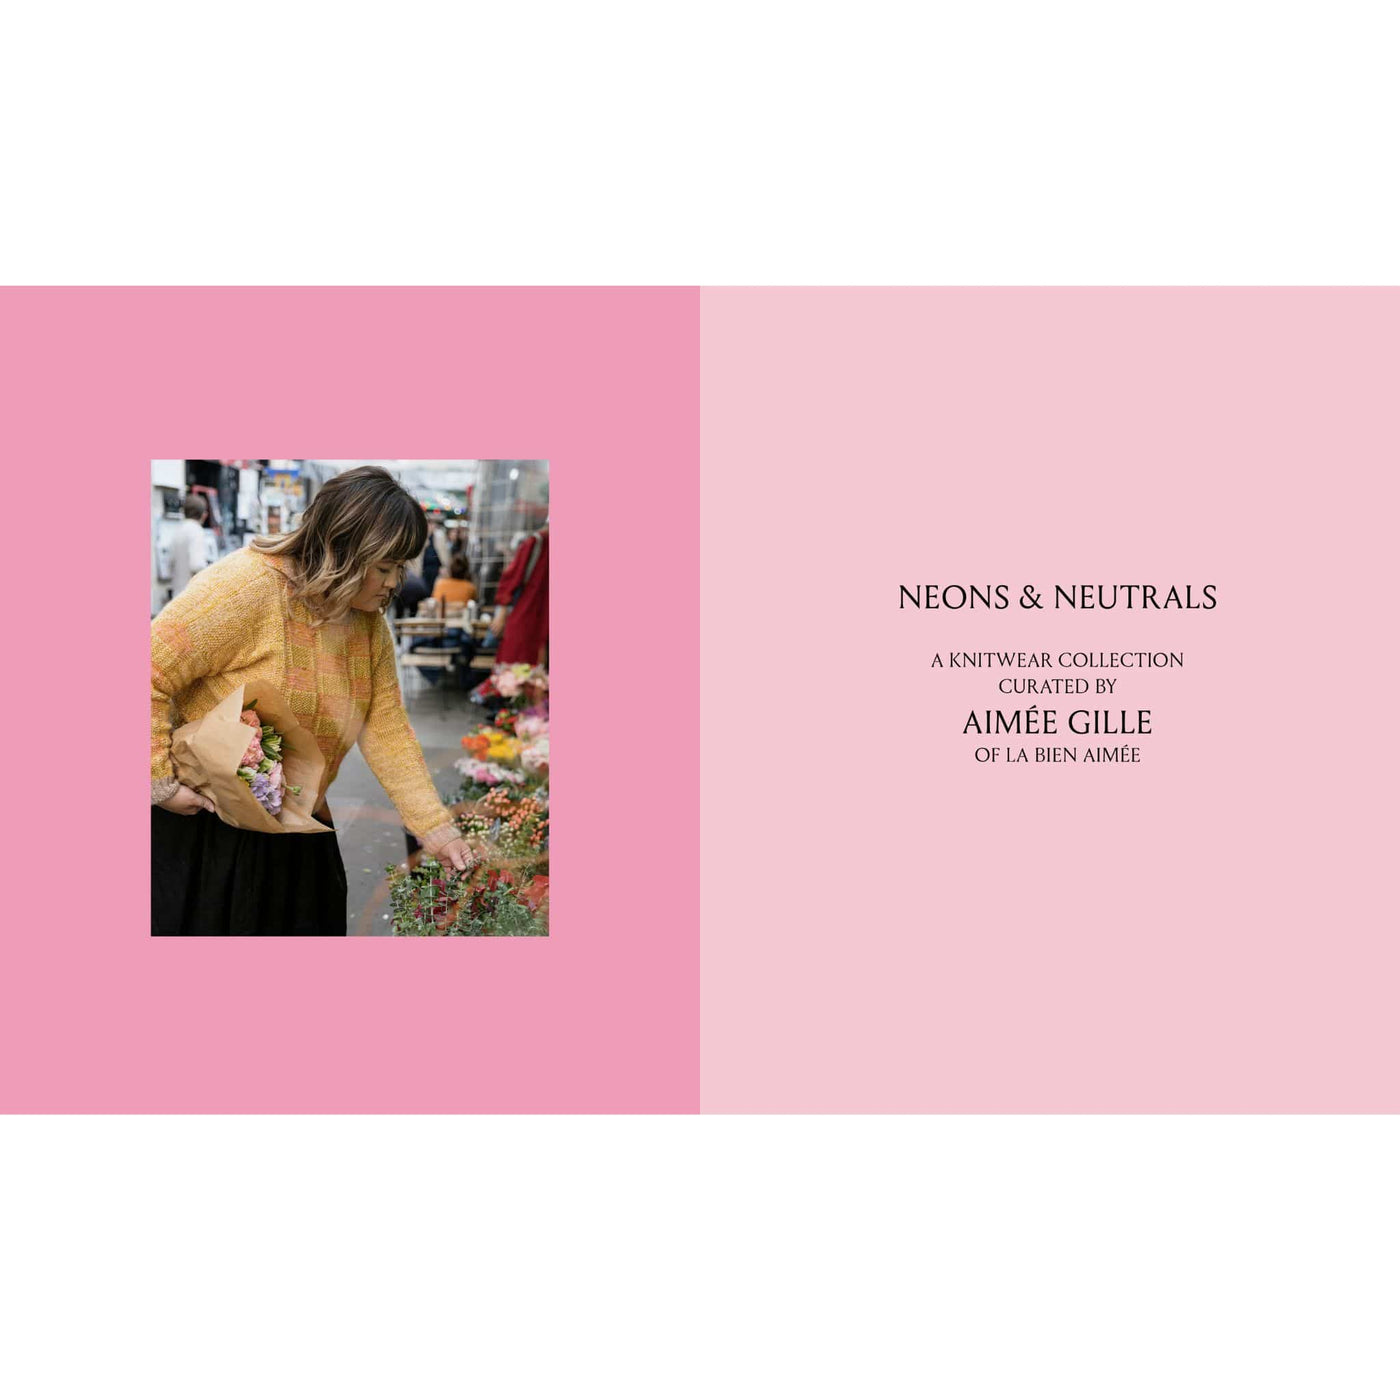 Spread of Neons & Neutrals: A Knitwear Collection Curated by Aimée Gille of La Bien Aimée. Spread shows photo of woman in yellow sweater picking out flowers on street. Facing page shows title of book. Both are on backgrounds in shades of pink. 